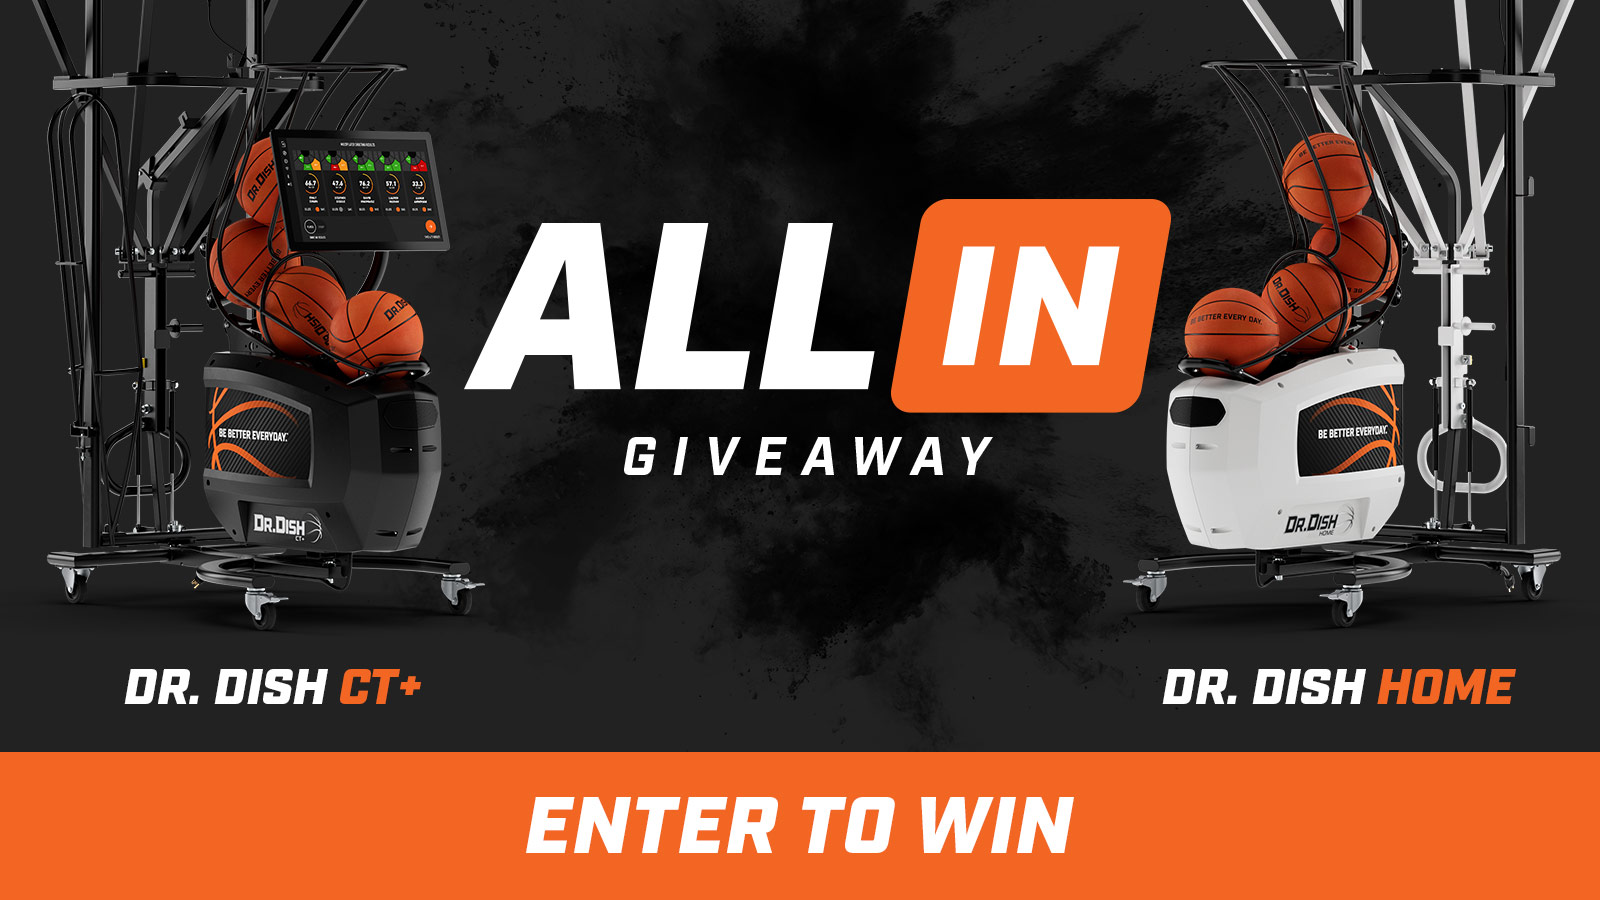 Enter to Win a Dr. Dish - All In Giveaway